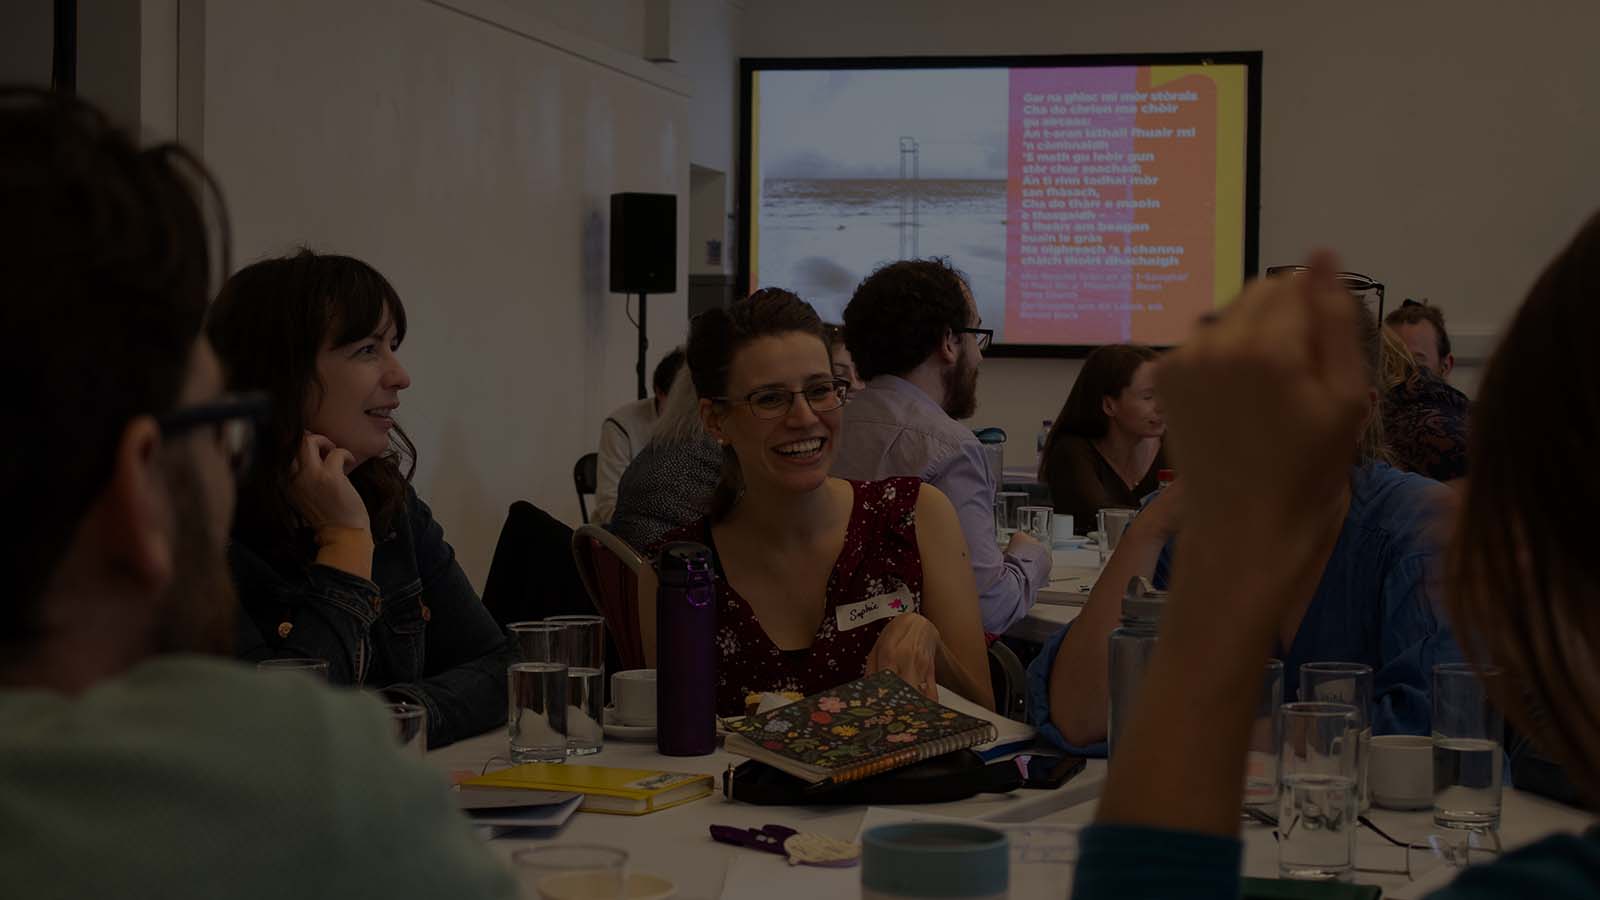 A group of people sitting and chatting together at a table, covered in notebooks, water glasses and cups of tea. They are in a large room, where more tables can be seen in the background, and a colourful image on a screen behind them in written in Scottish Gaelic.